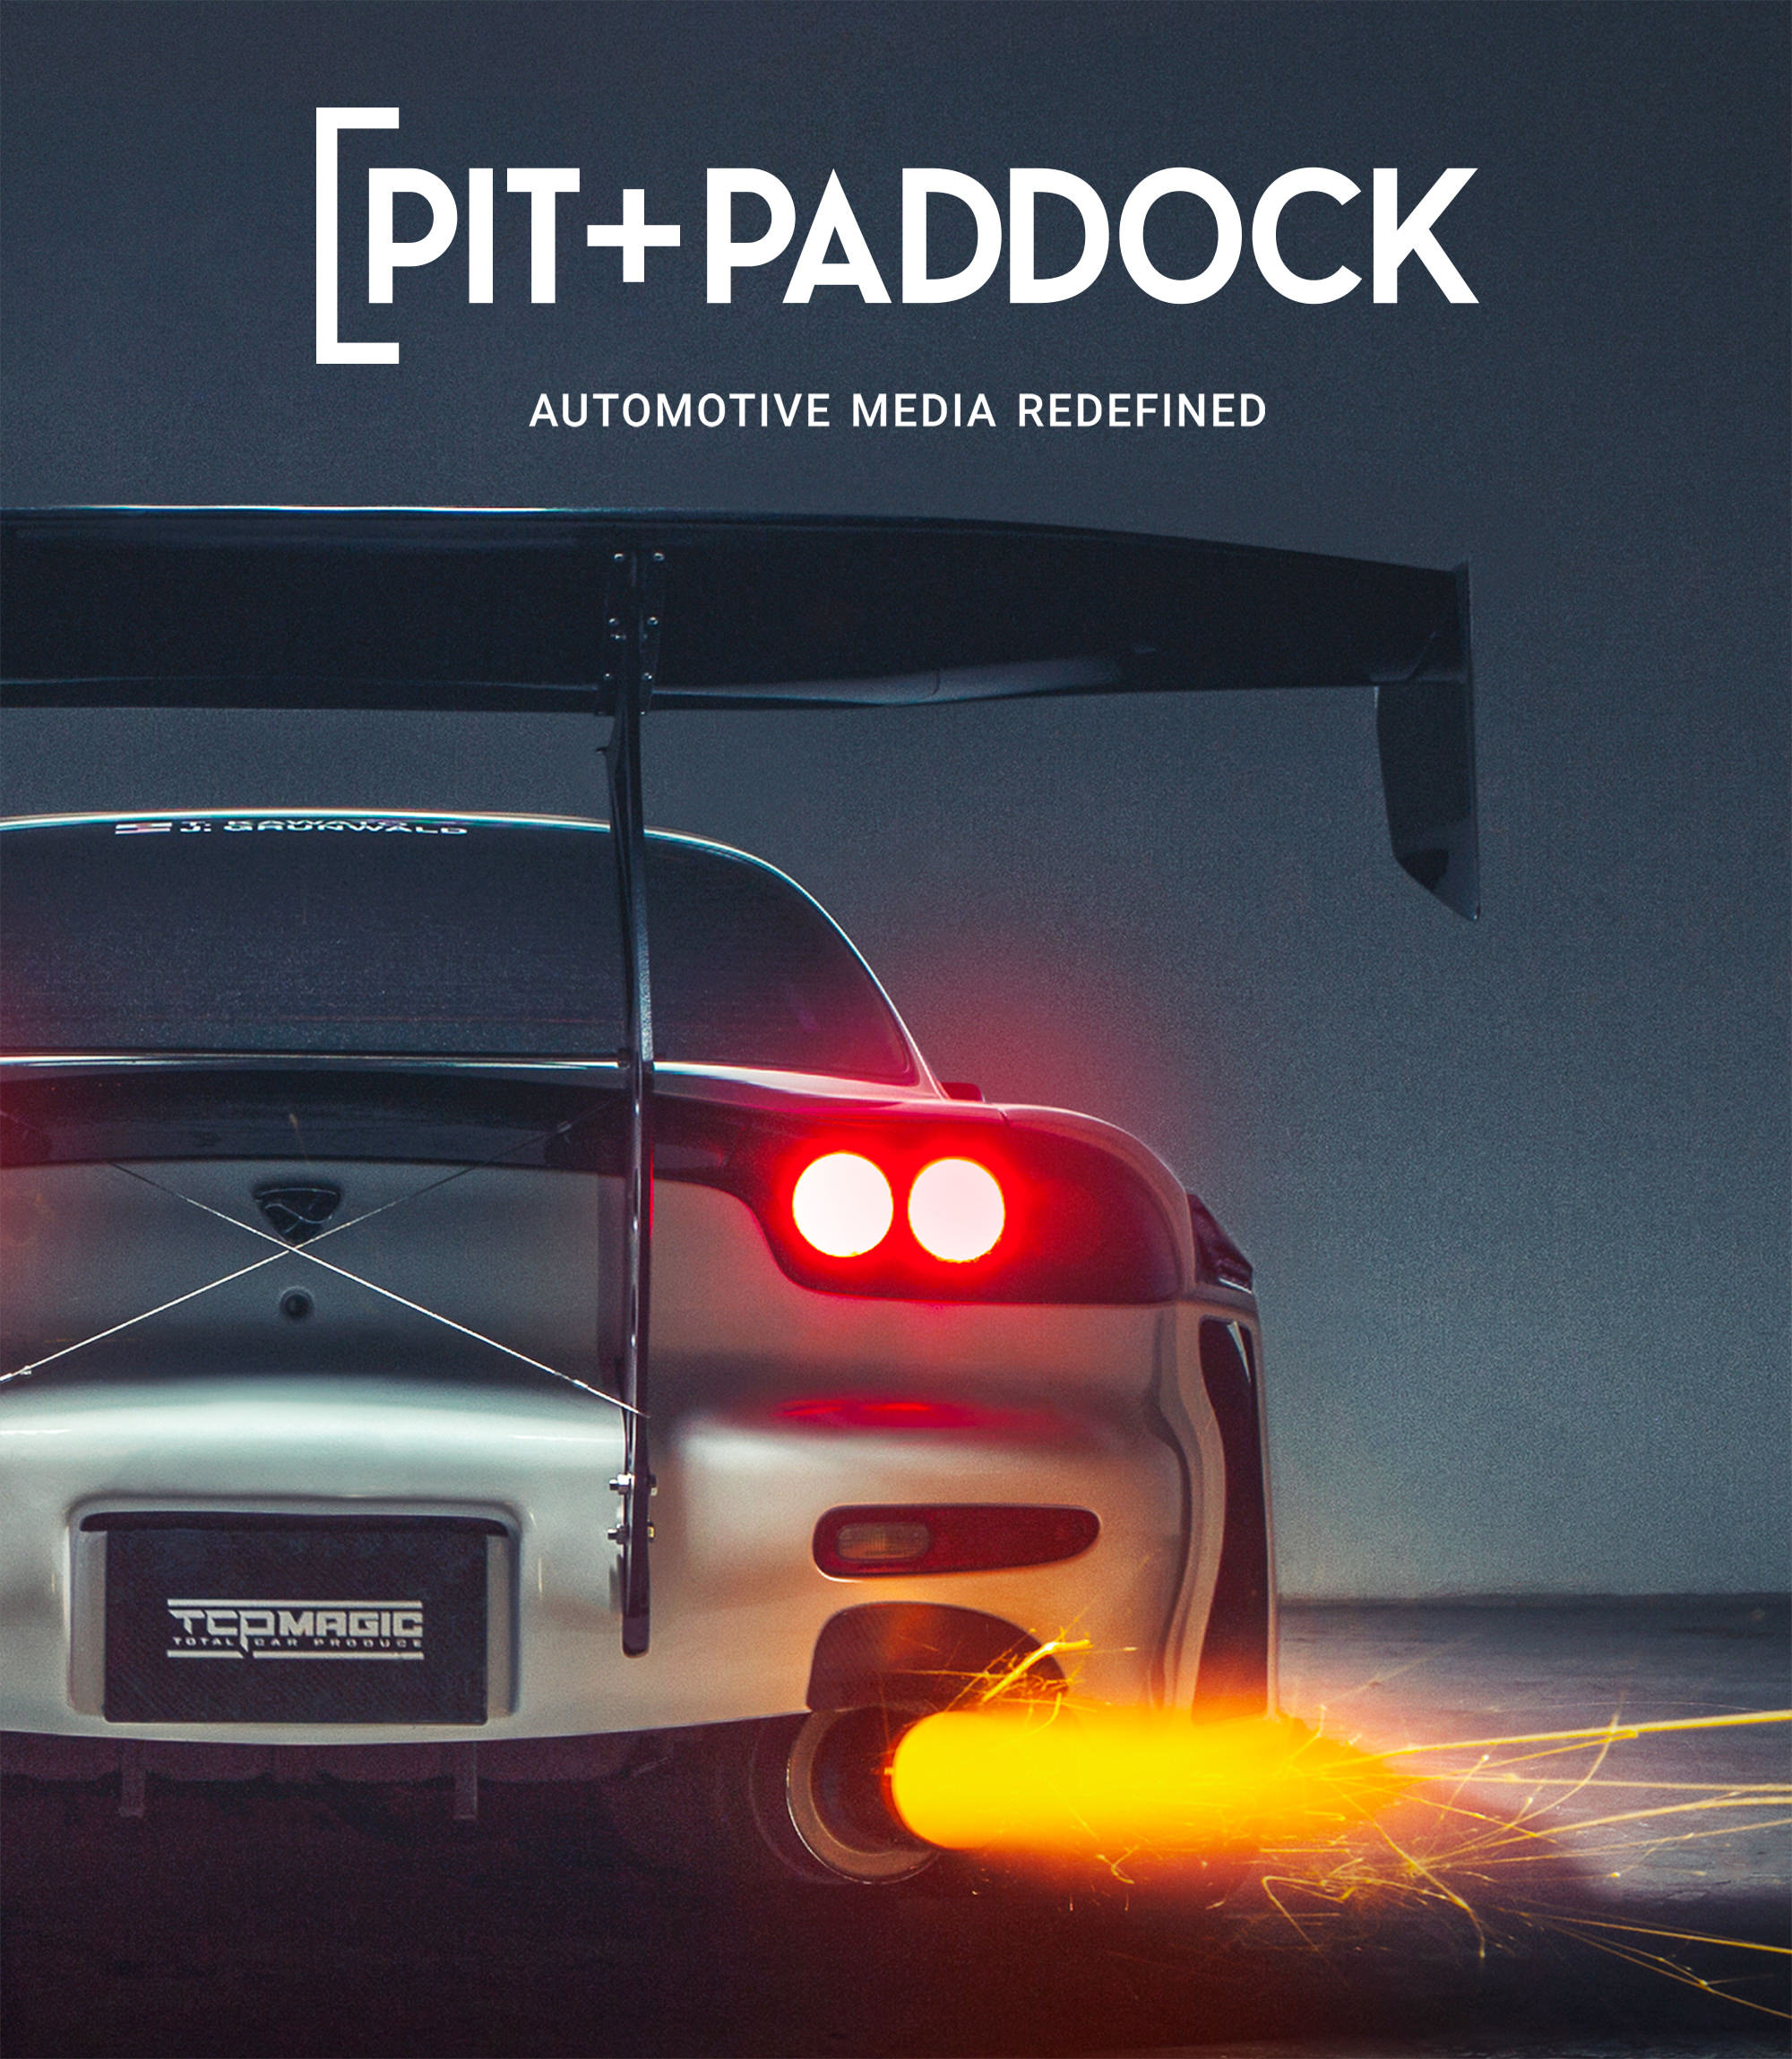 Turn 14 Distribution’s 'Pit+Paddock' Lifestyle Brand to Exhibit at SEMA Show | THE SHOP